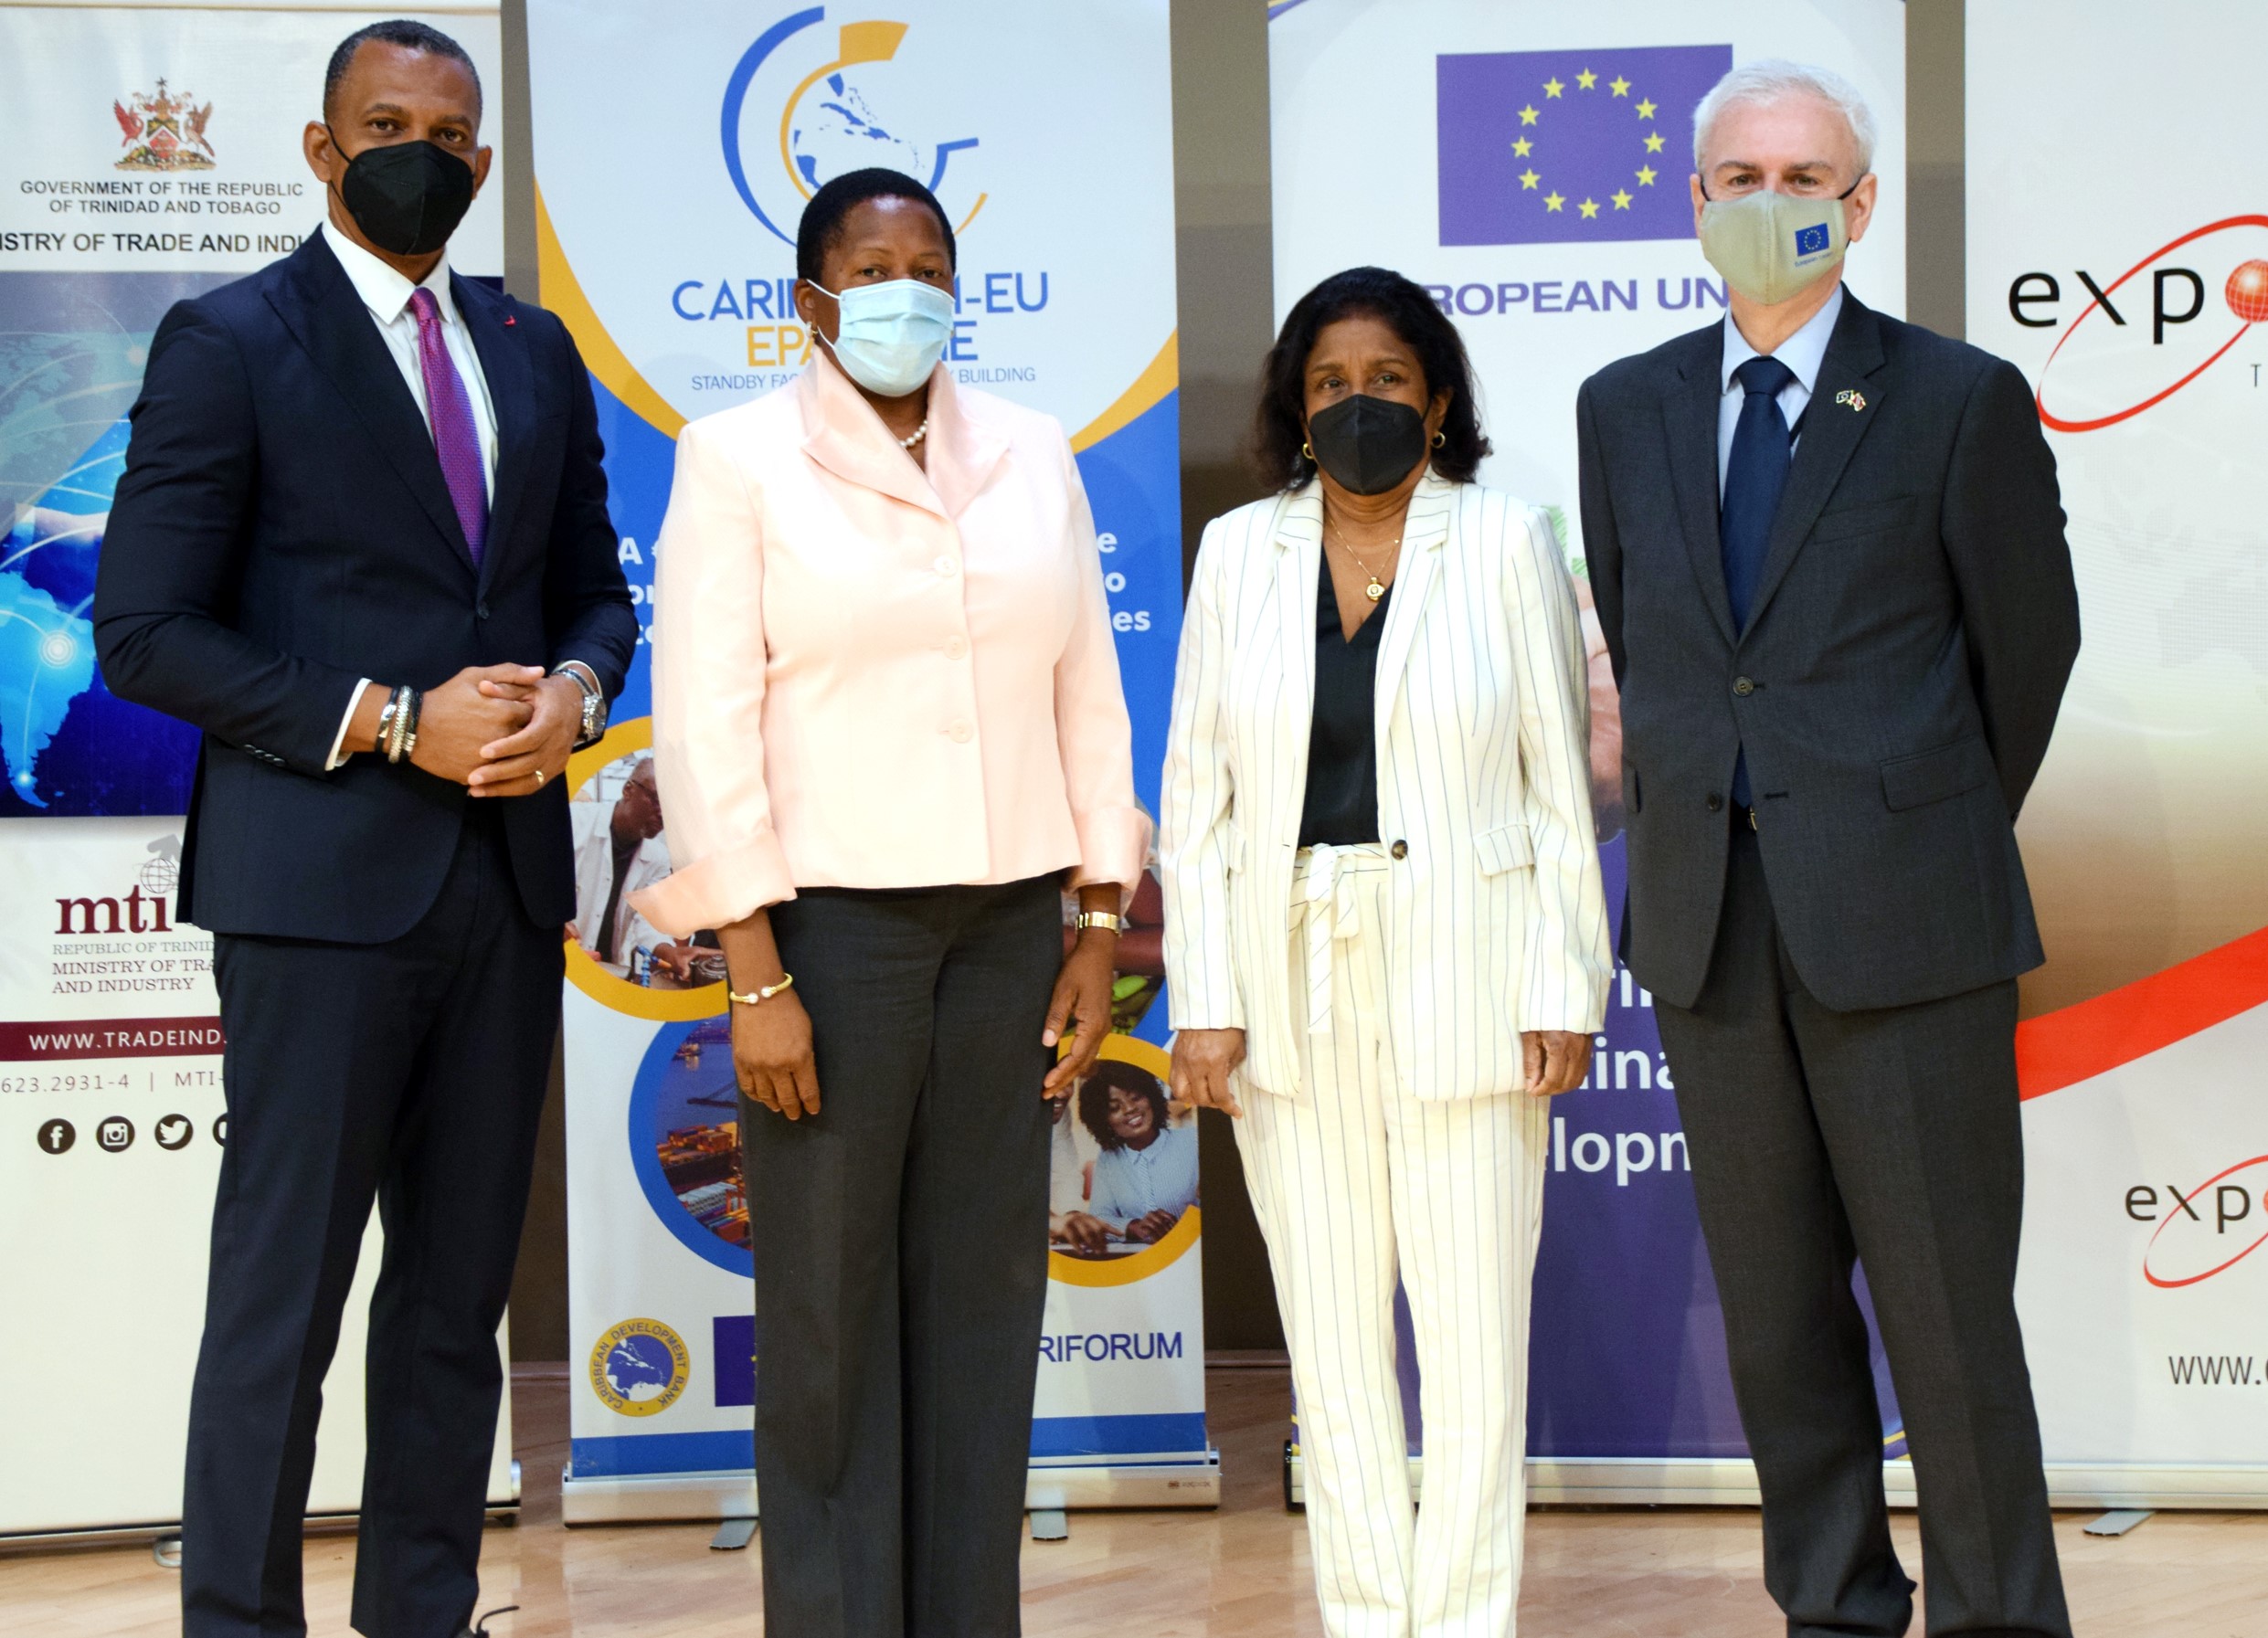 Improvements To T&T’s Trade Environment Underway With CDB & EU Support